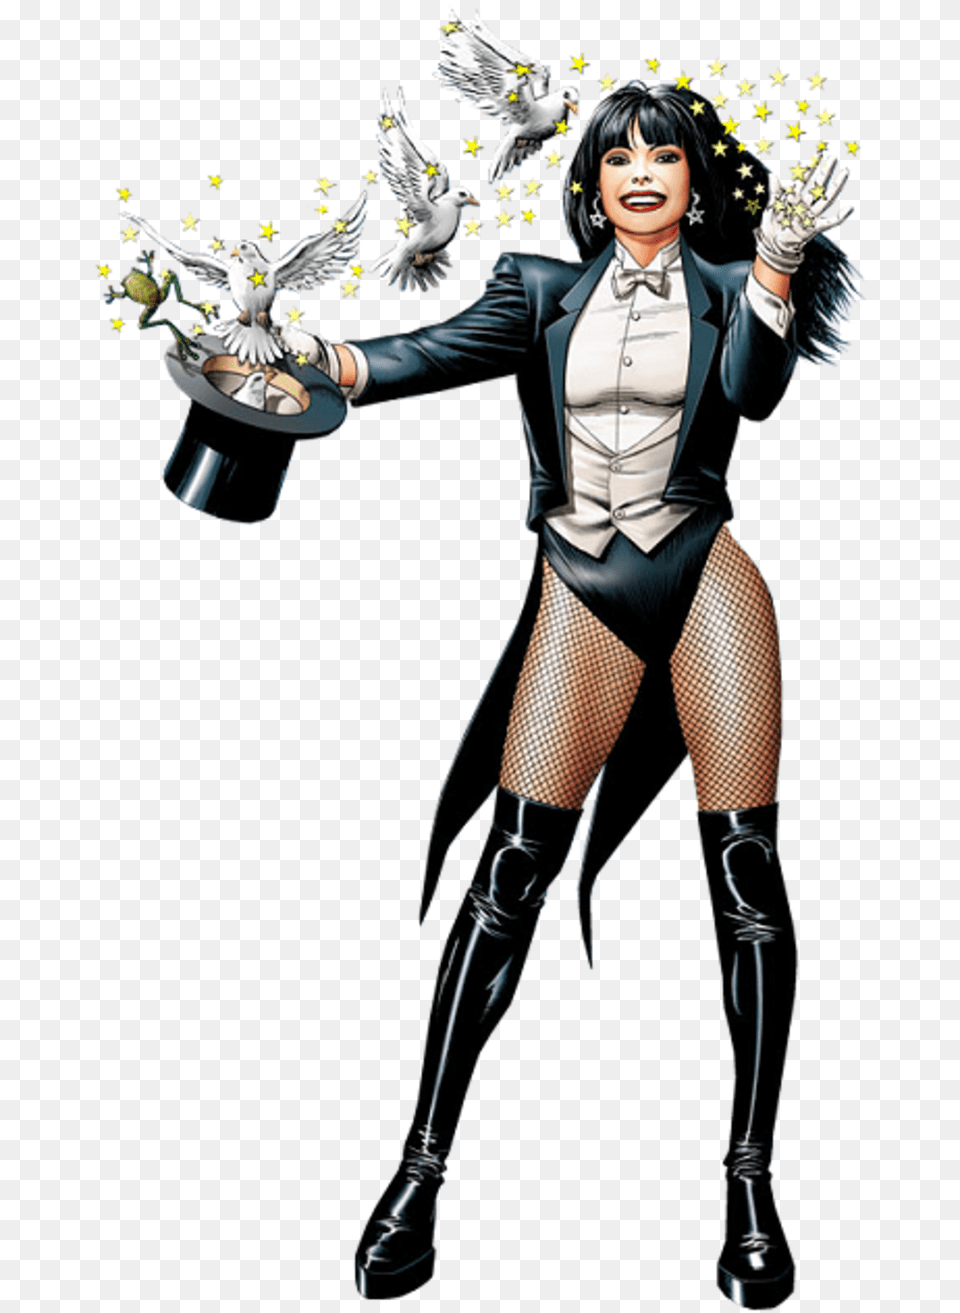 Wallpaper And Background Photos Of Zatanna For Fans Zatanna By Paul Dini, Publication, Book, Comics, Adult Free Transparent Png